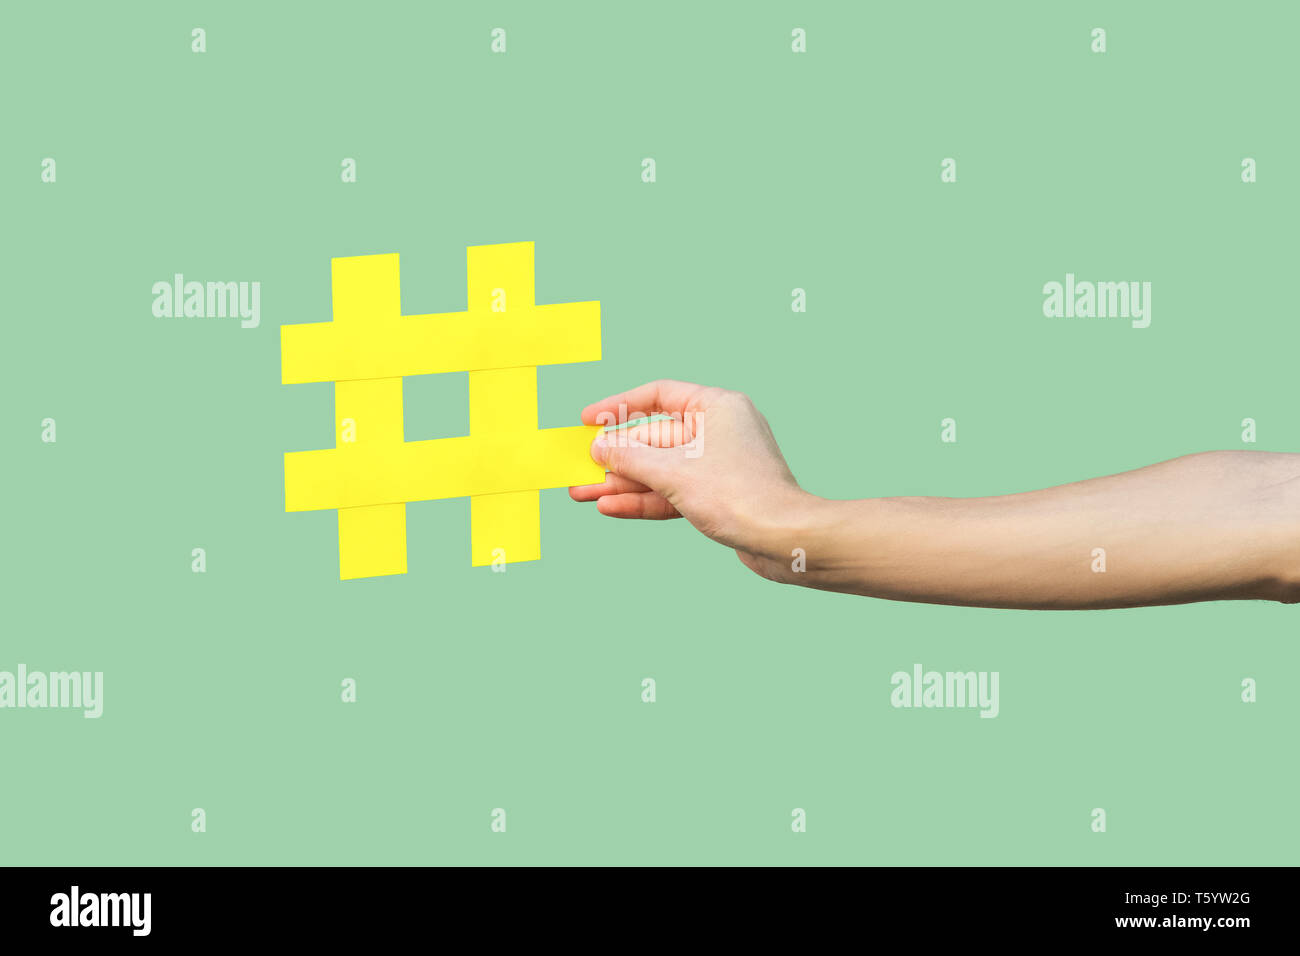 Social media concept, closeup portrait of hand holding large big yellow hash tag signe. Piscine, isolée, copy space, fond vert, marketing symbo Banque D'Images